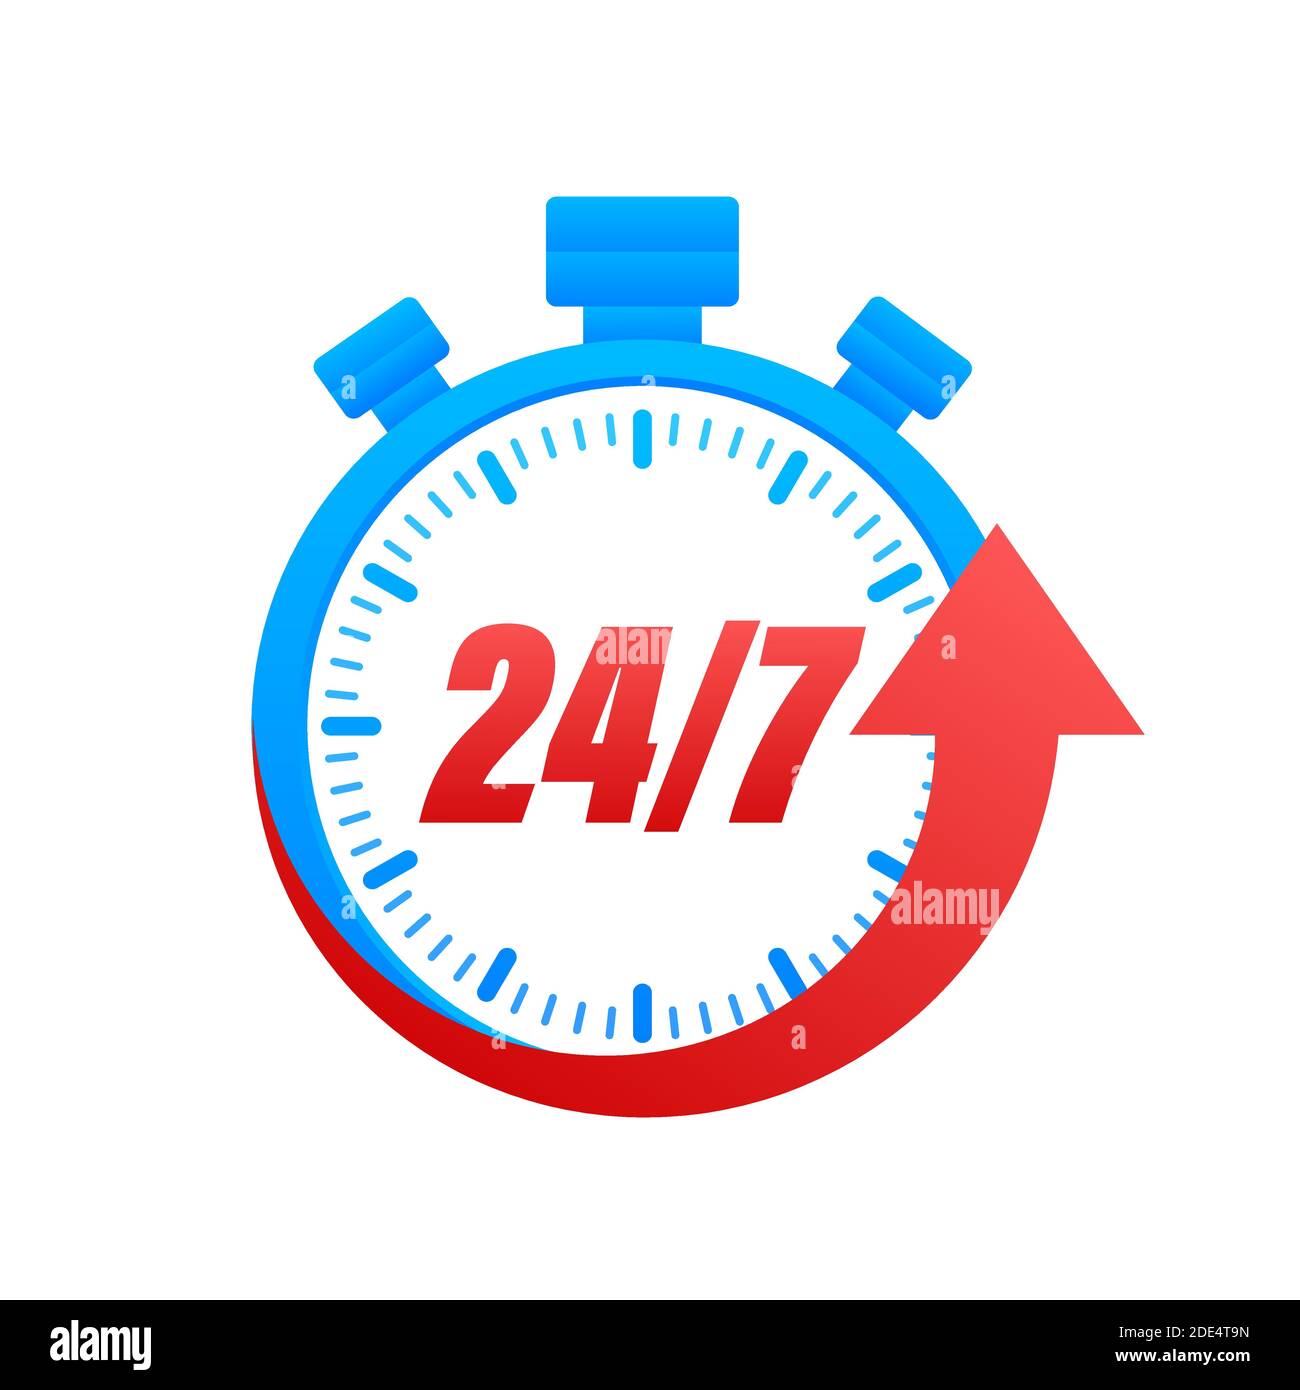 24-7 service concept. 24-7 open. Support service icon. Vector stock illustration. Stock Vector